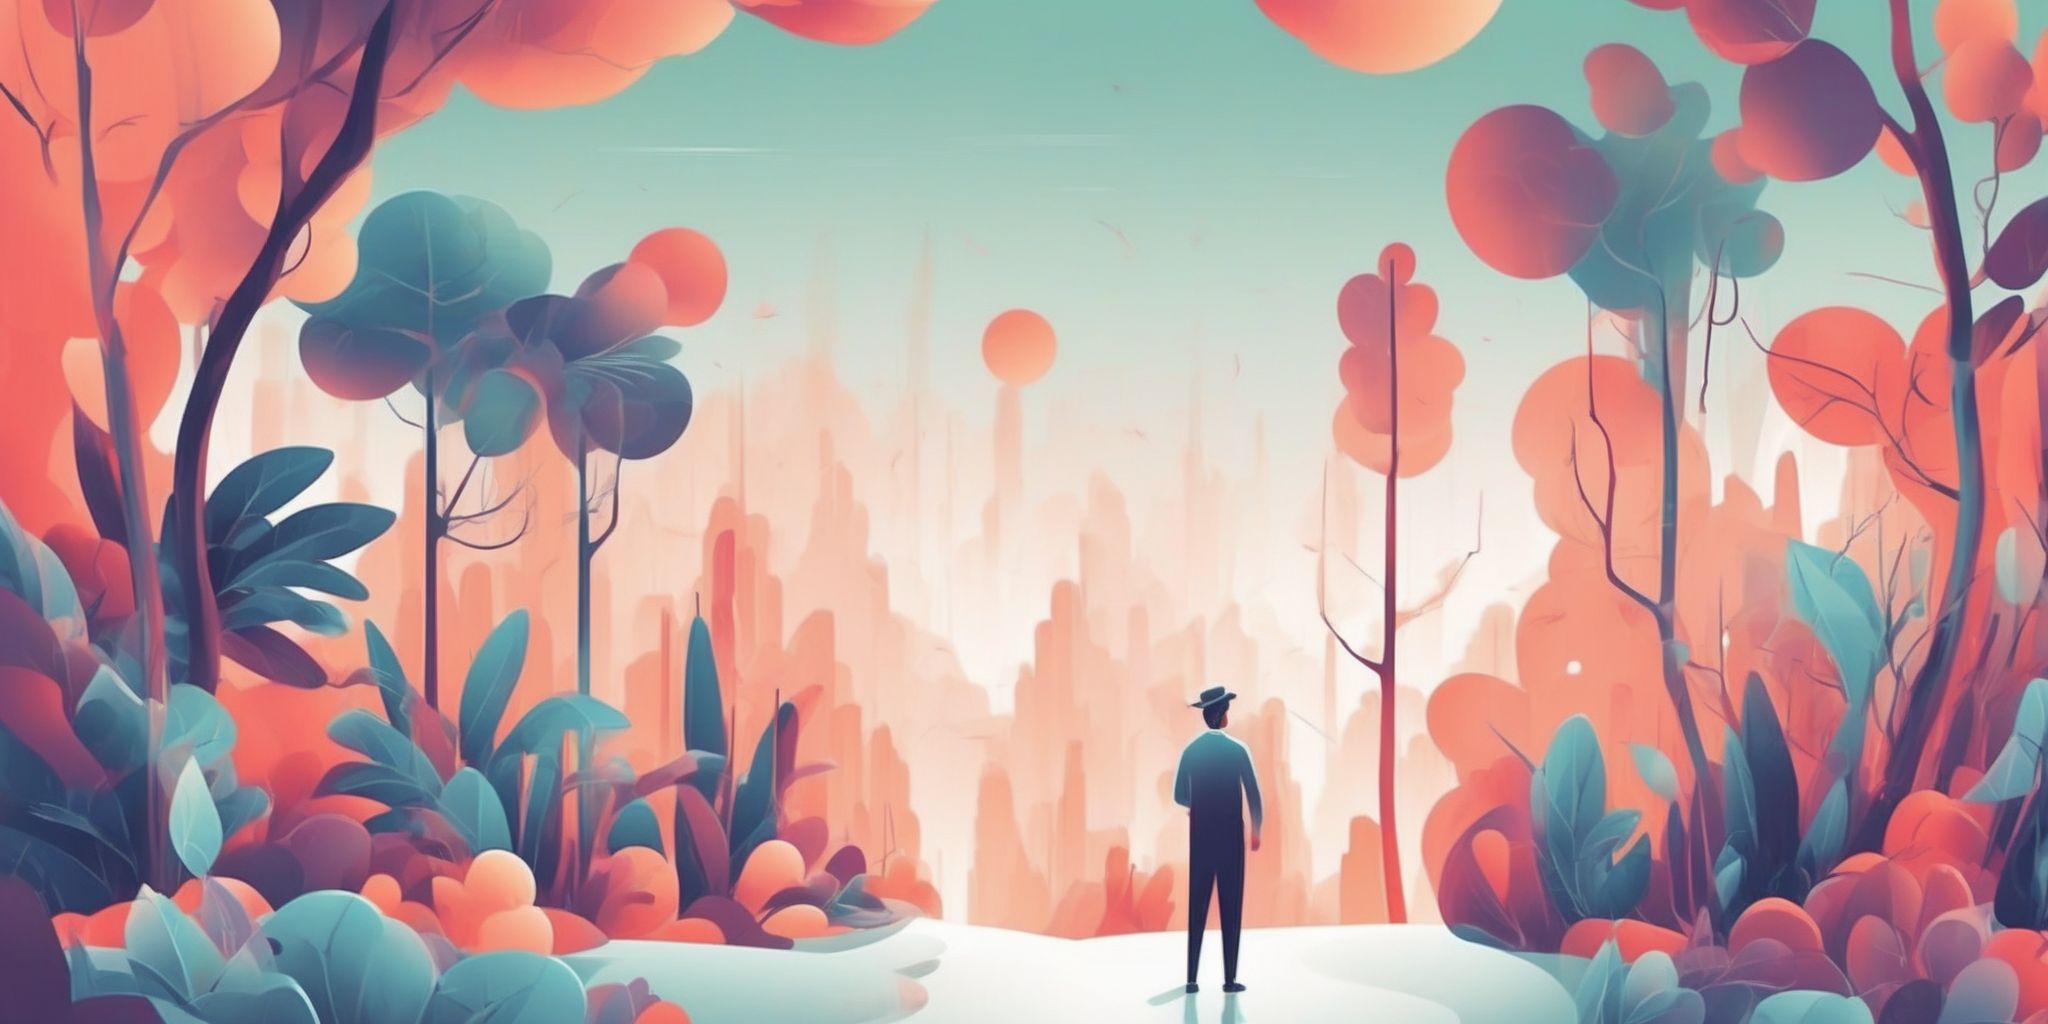 Visual storytelling in illustration style with gradients and white background